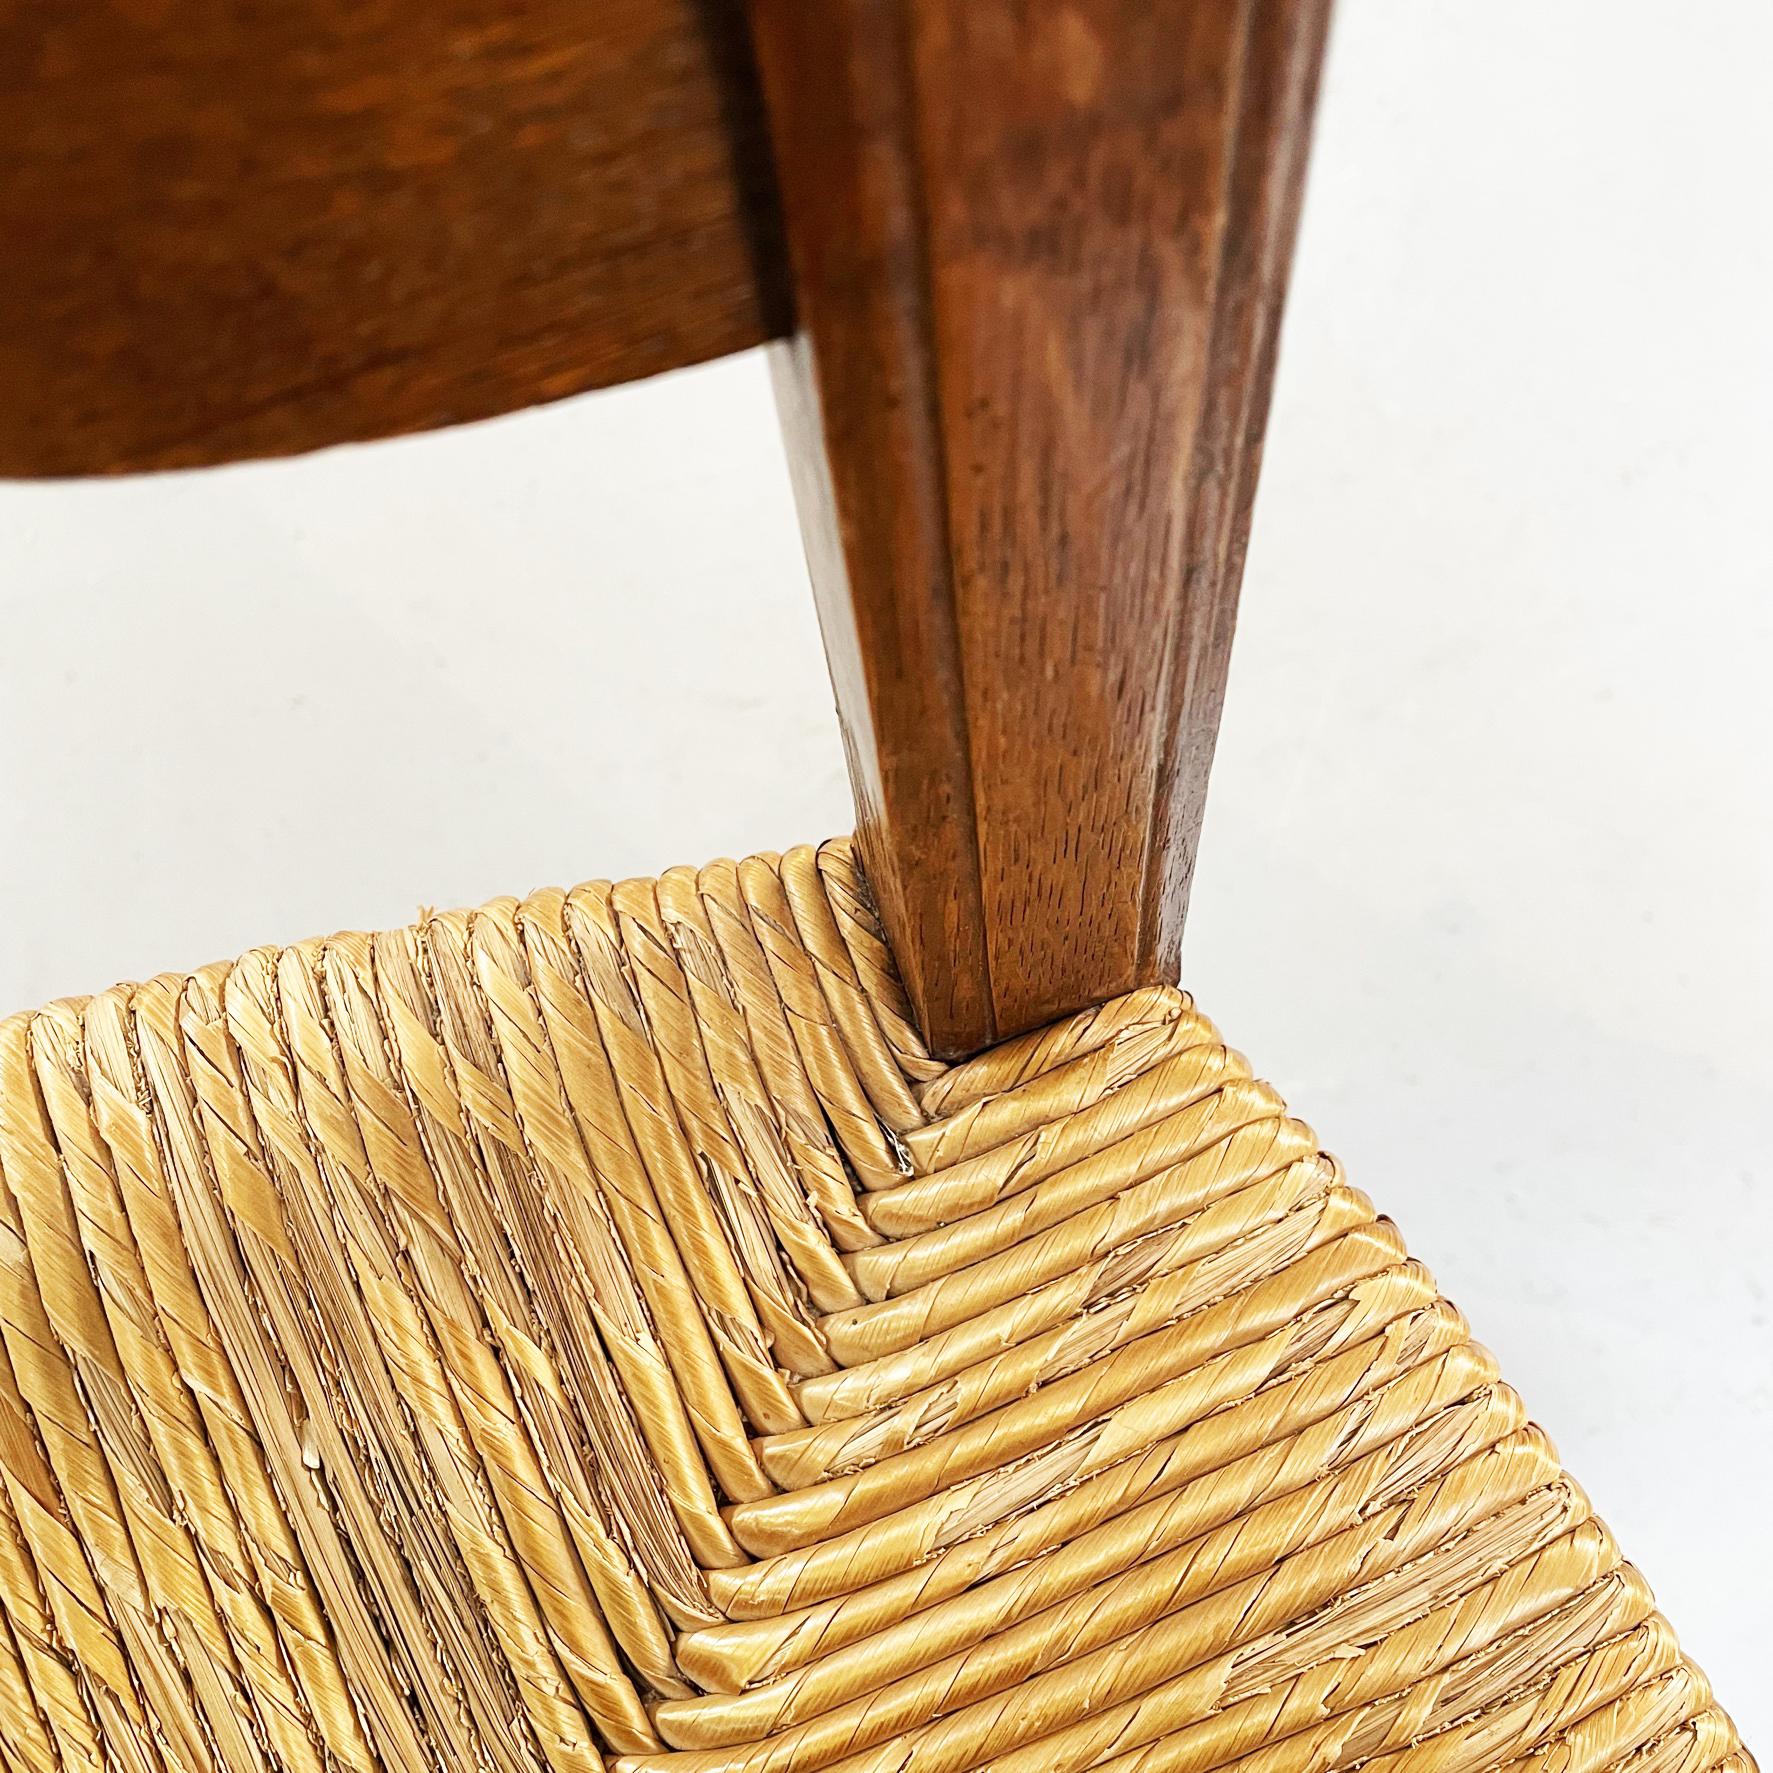 Italian Nineteenth Century Finely Crafted Wooden and Straw Chairs, Late1800s For Sale 5